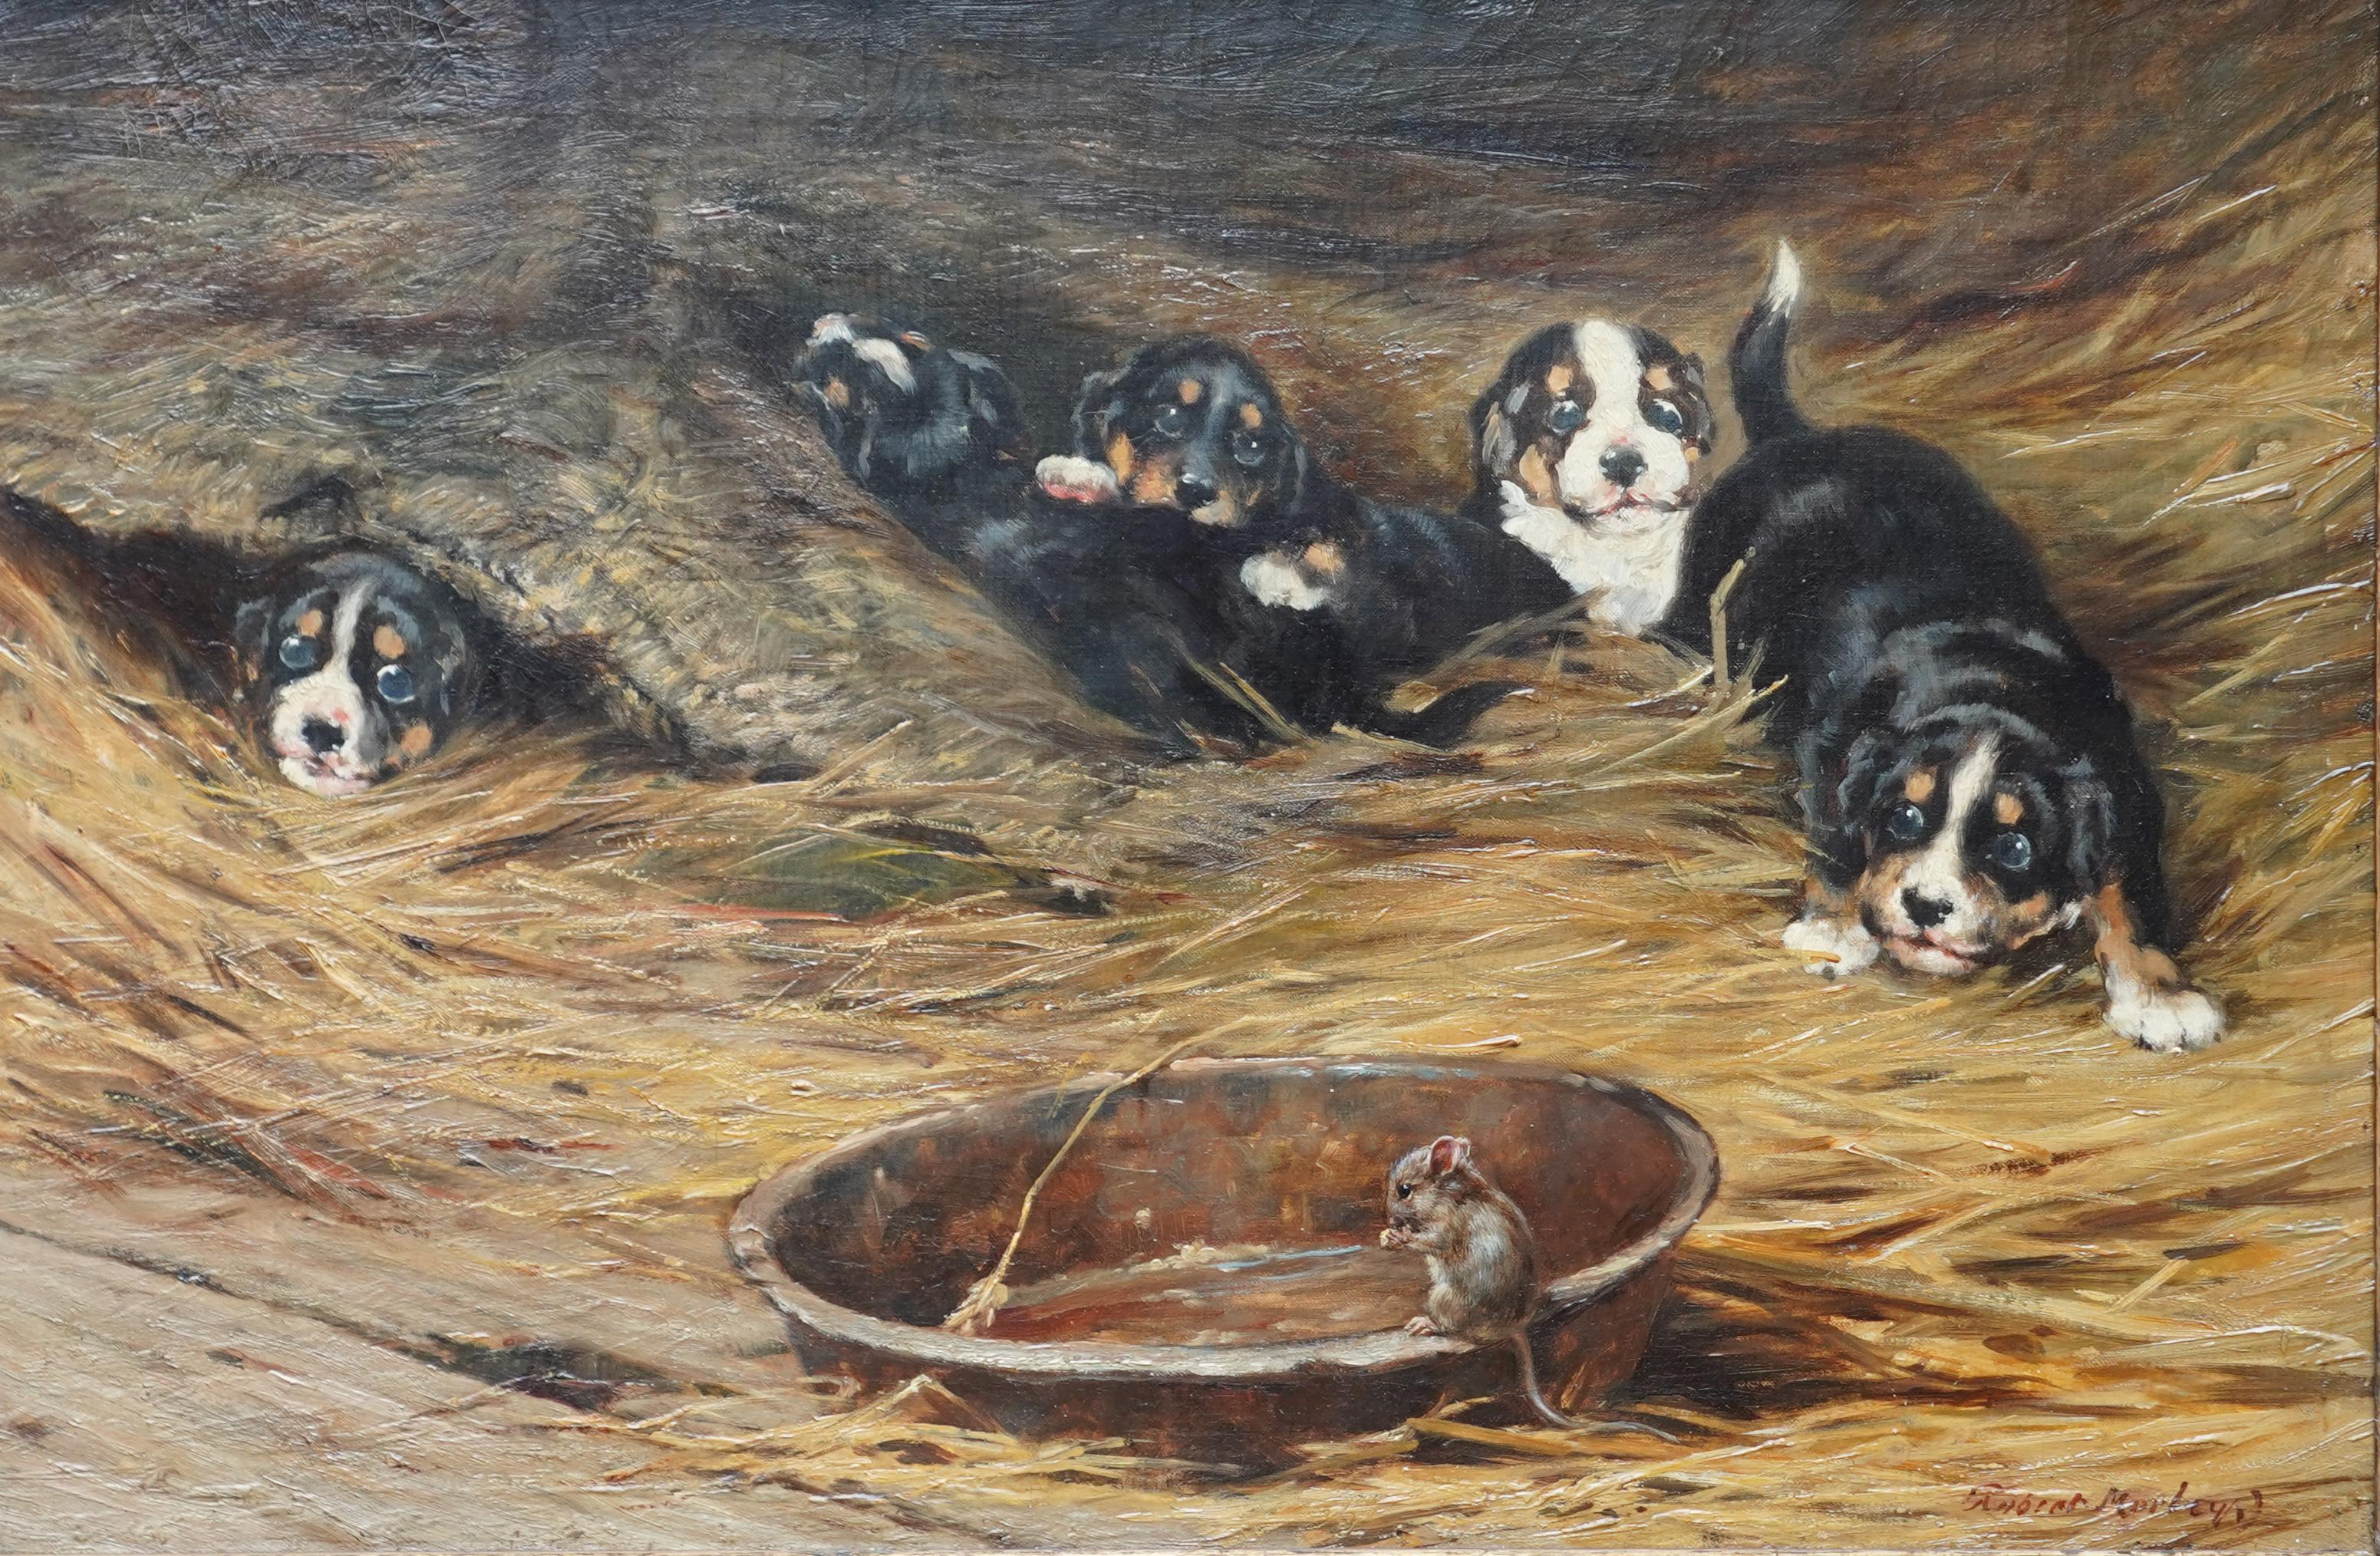 Mouse with Spaniel Puppies - British Edwardian art dog portrait oil painting - Painting by Robert Morley